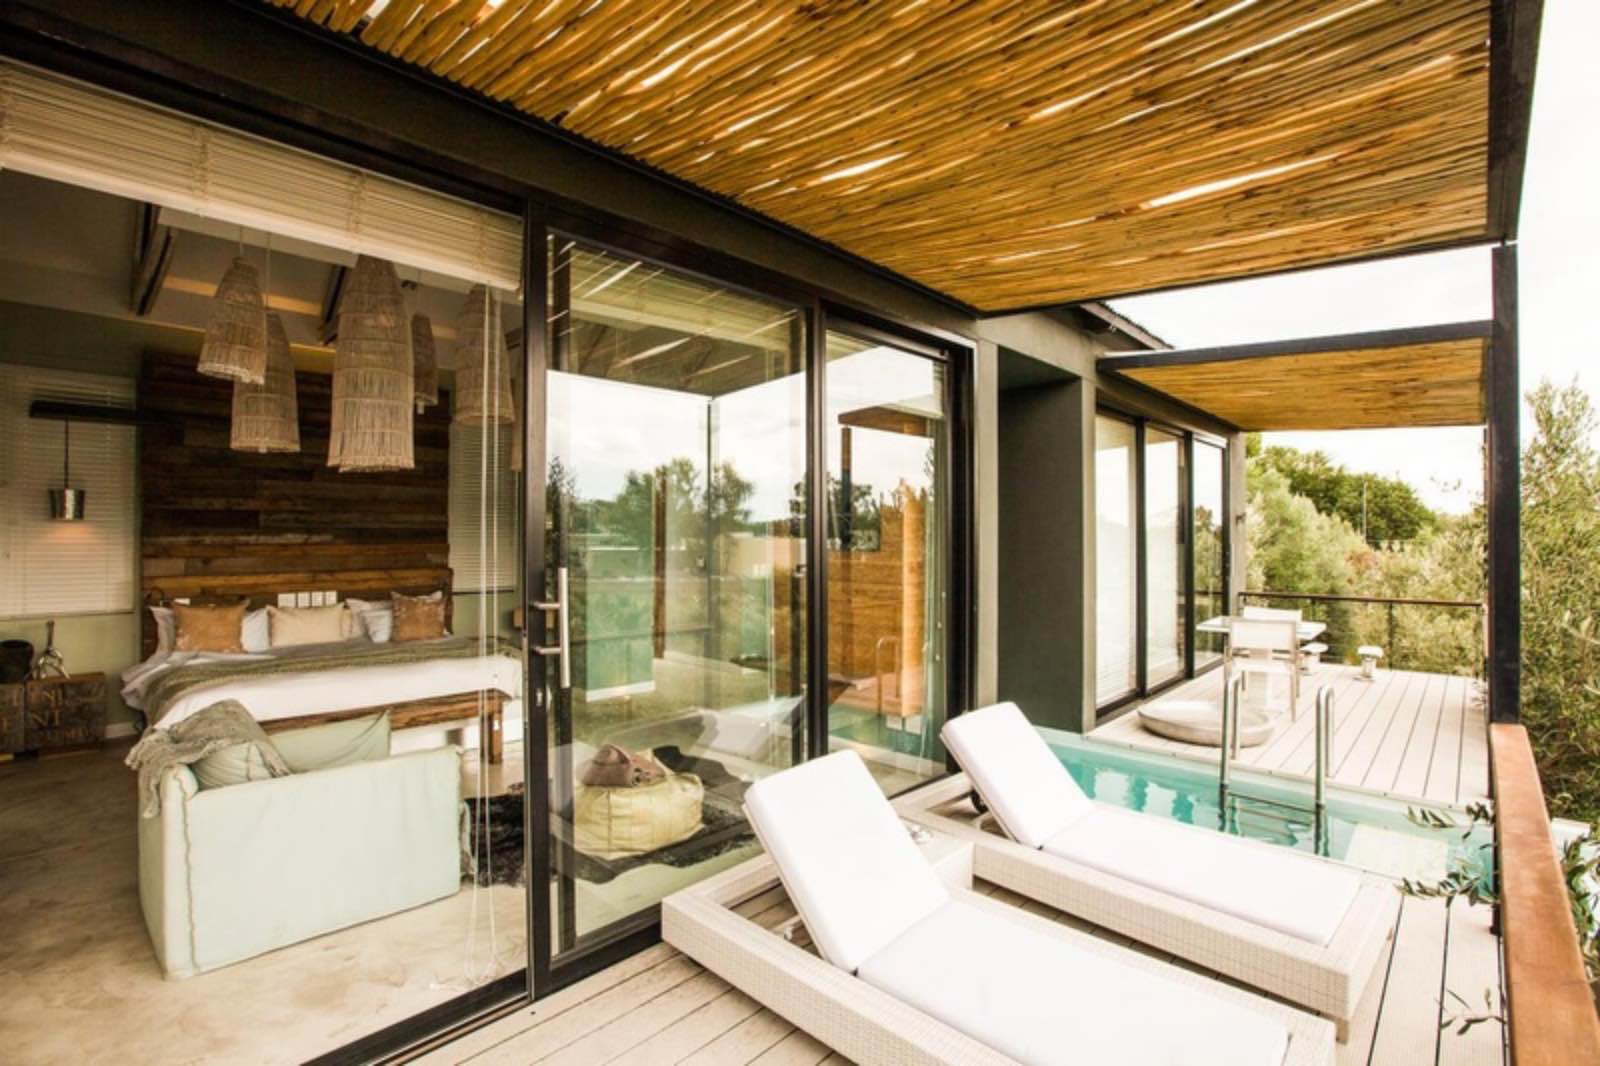 The Olive Exclusive premier suite deck and plunge pool